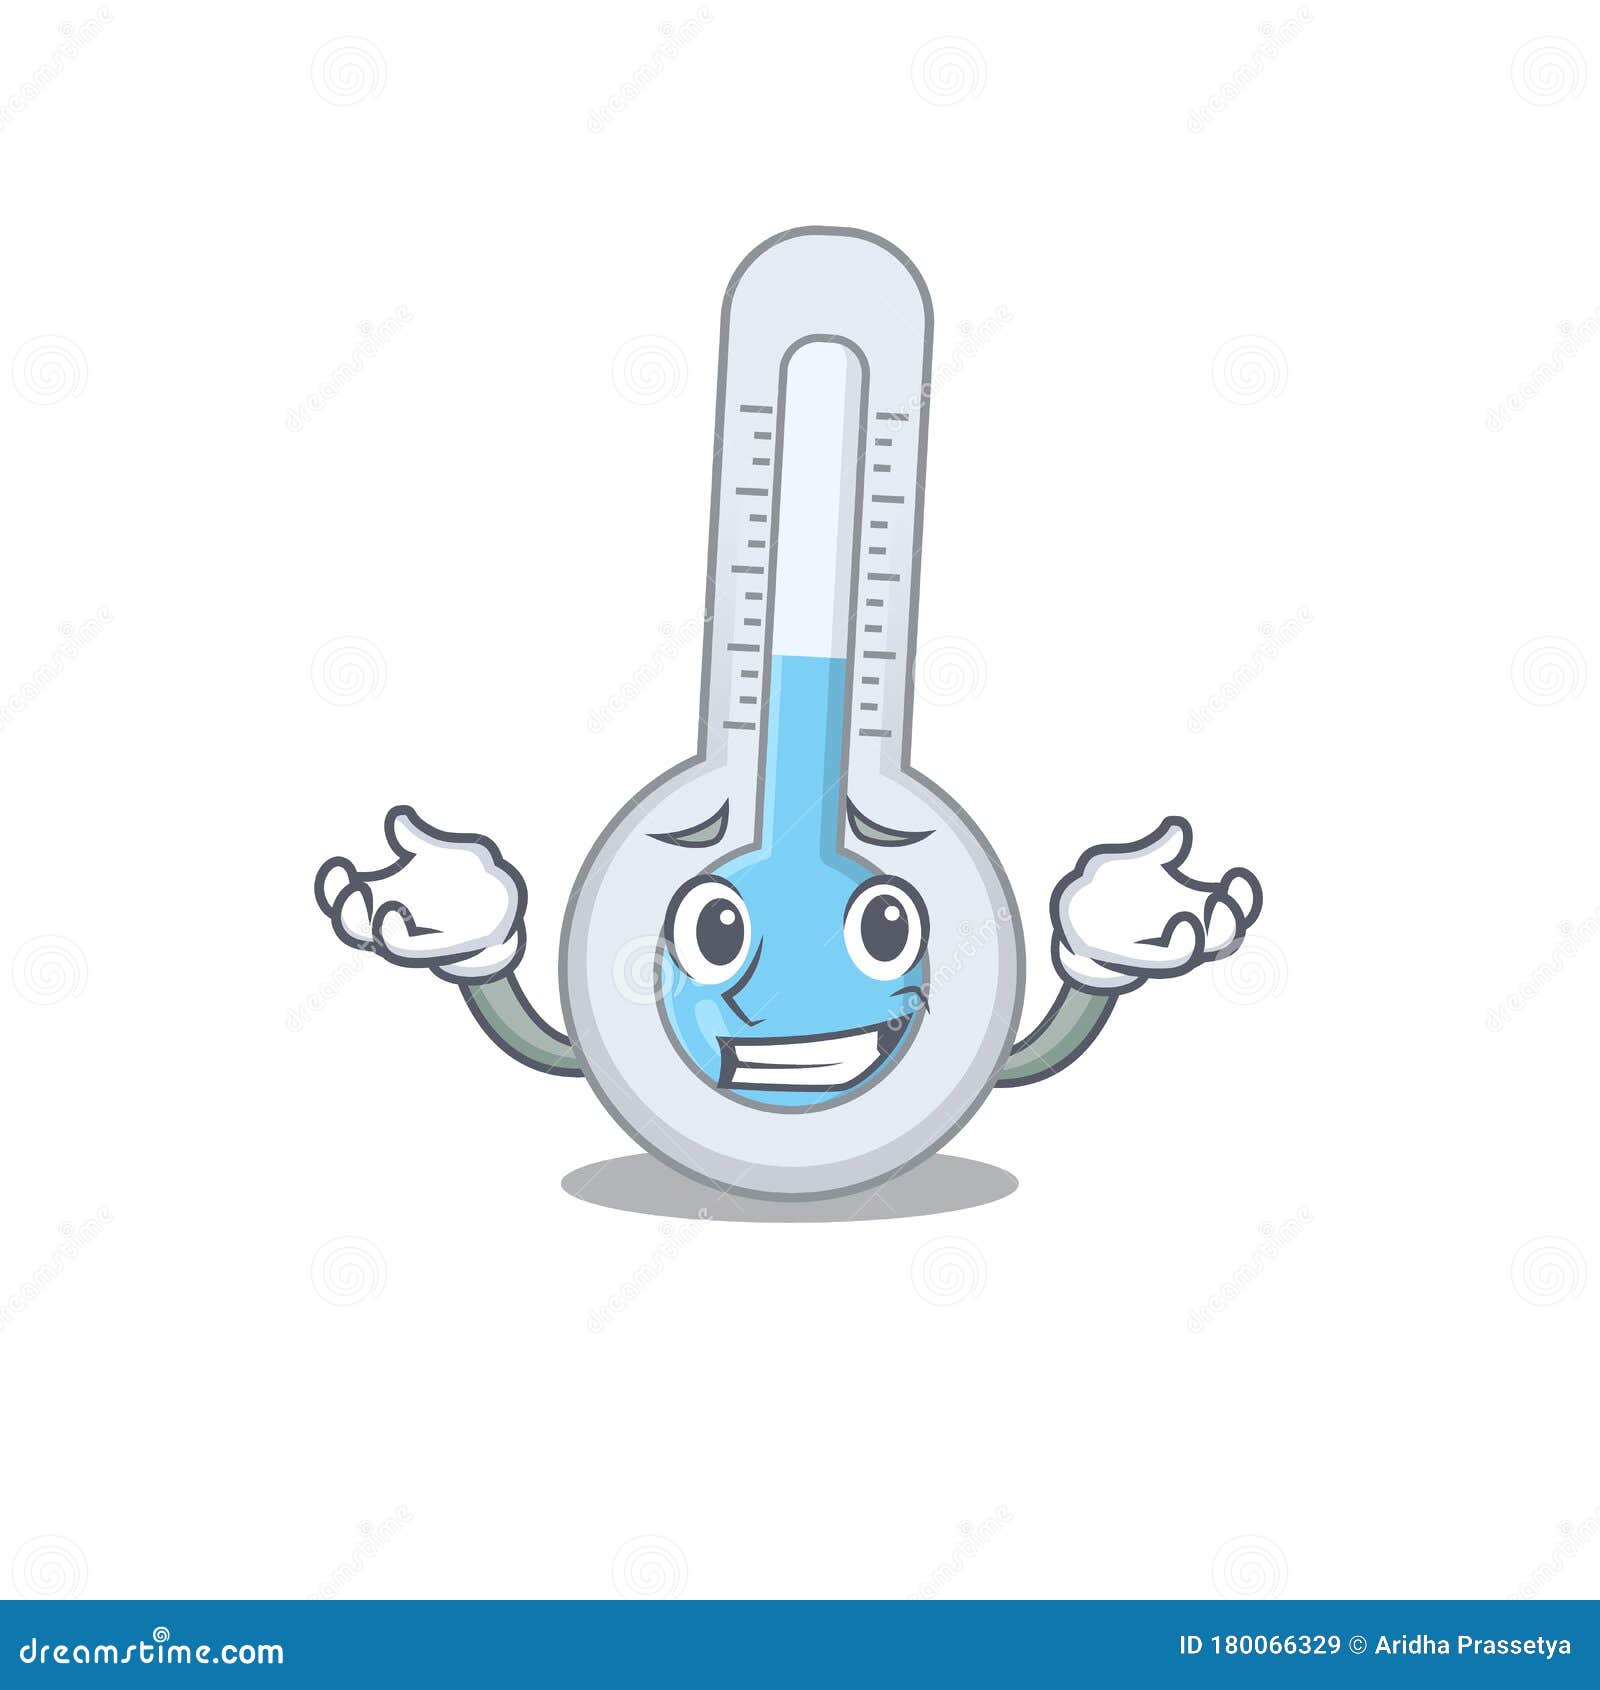 A Picture of Grinning Cold Thermometer Cartoon Design Concept Stock Vector  - Illustration of cute, indicator: 180066329